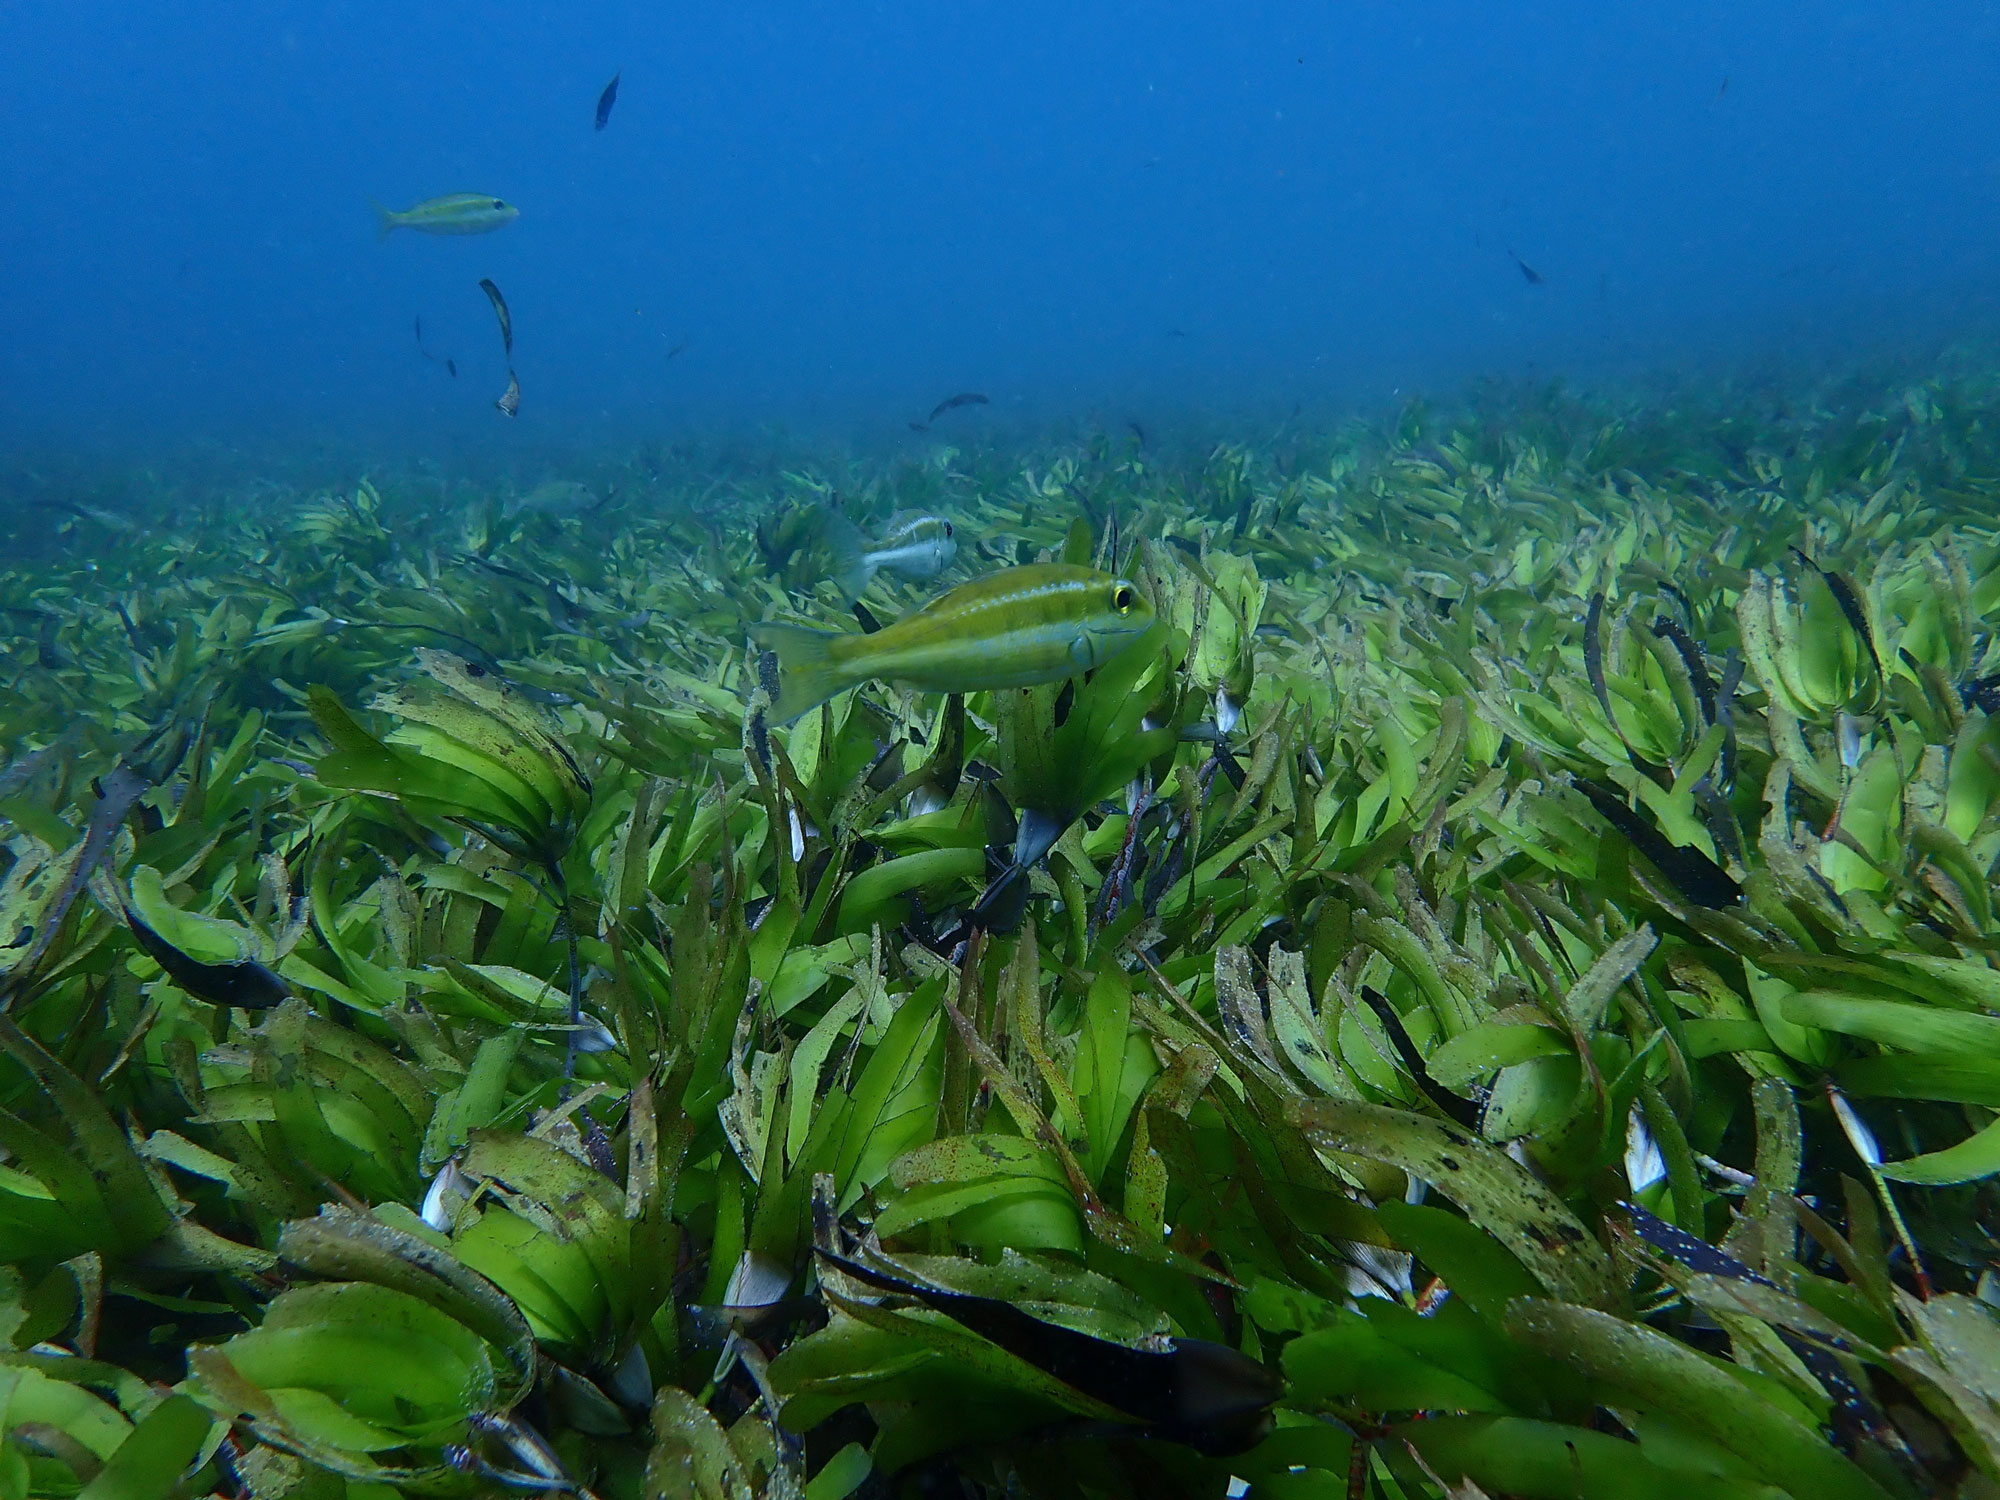 Seagrass meadows absorb less carbon dioxide than thought